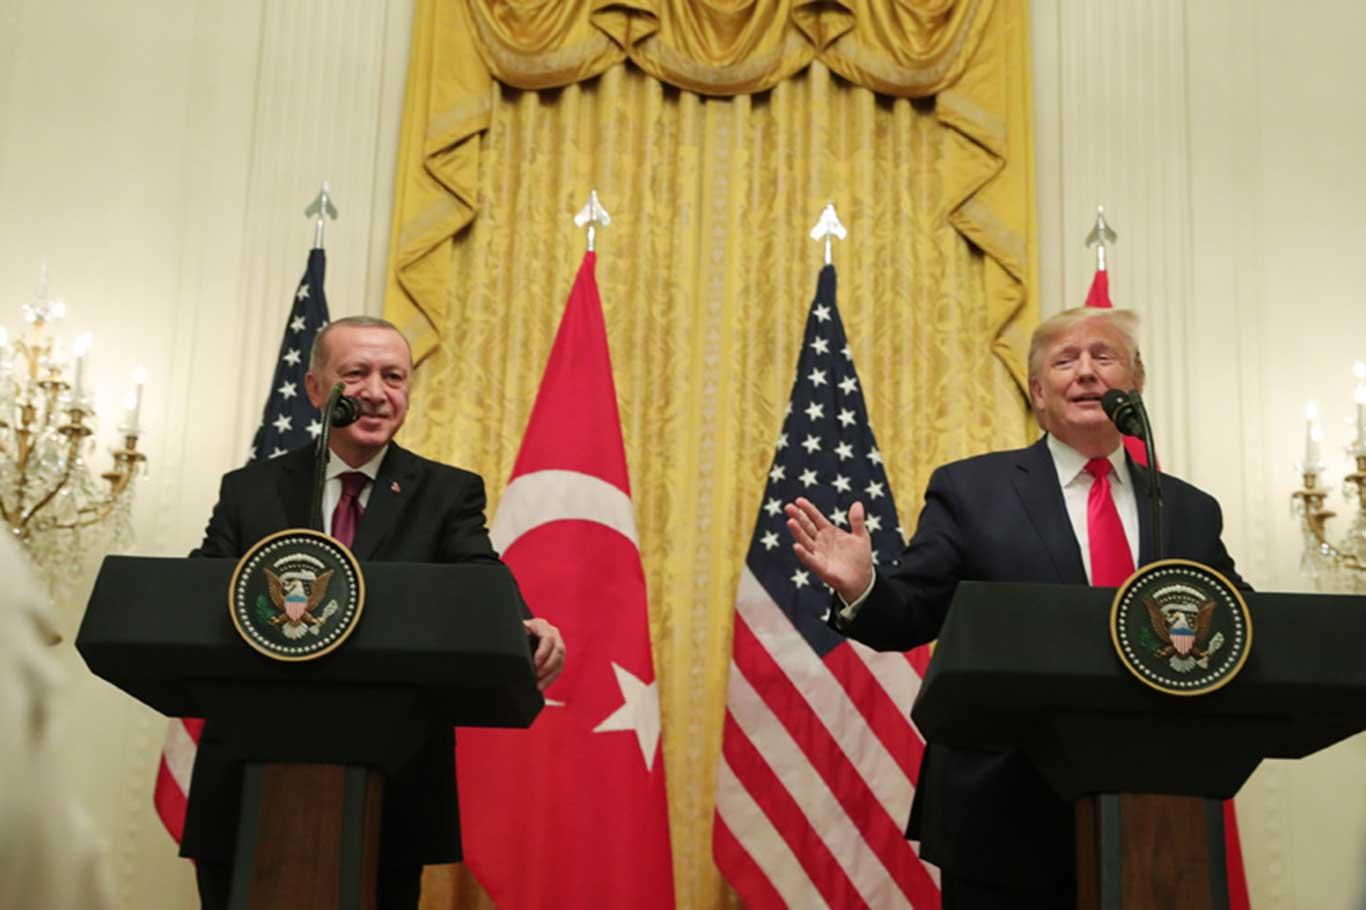 The video that Erdogan shows to US President Trump